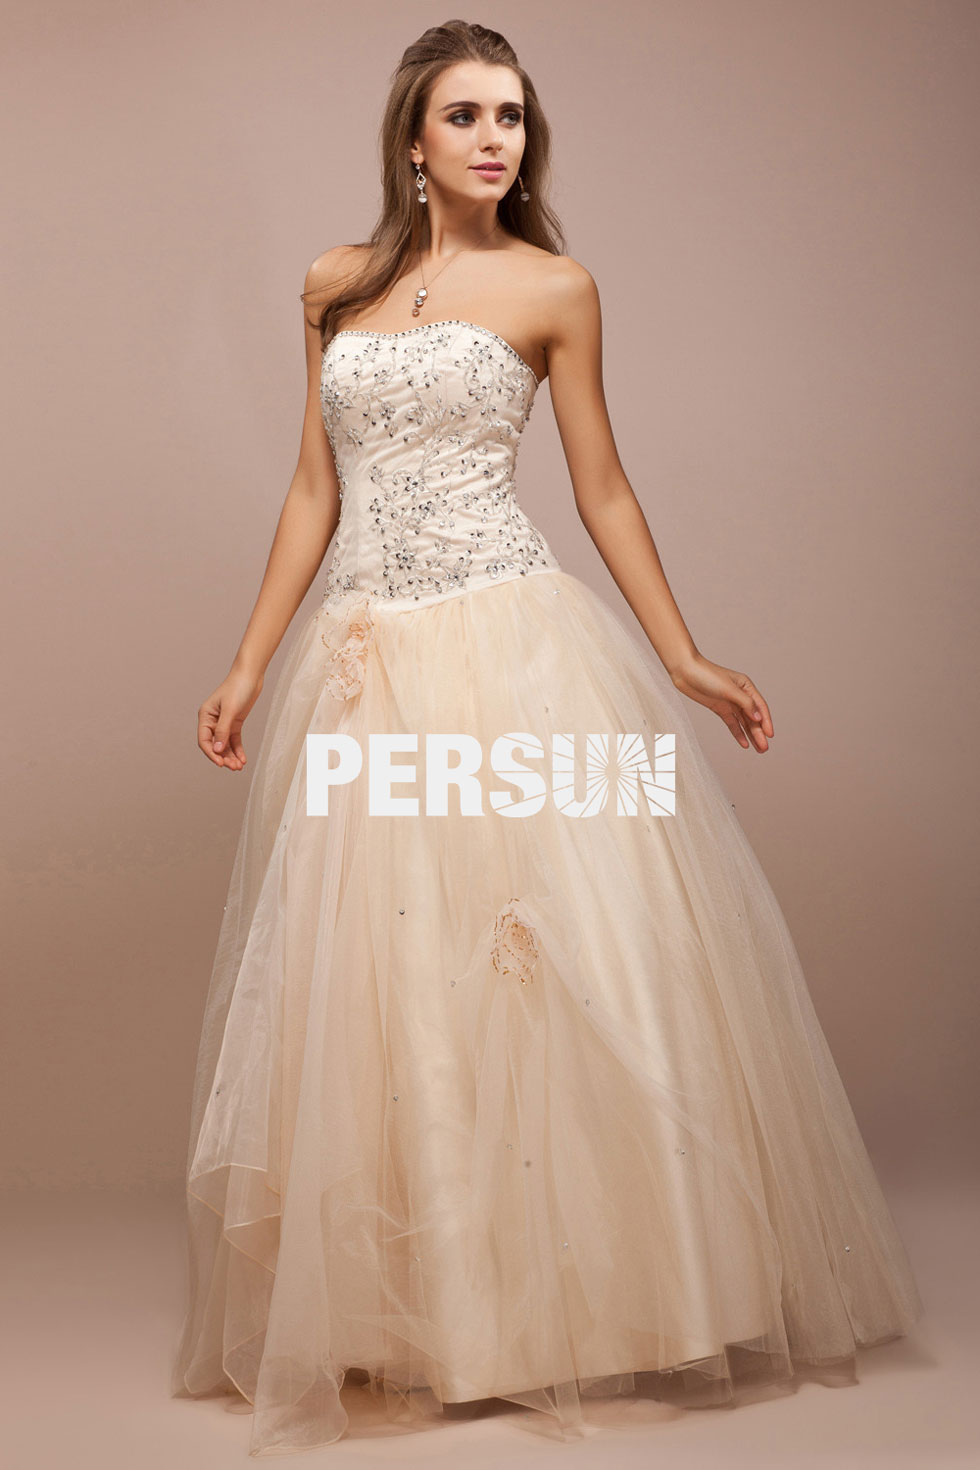 Sweetheart Applique Flower Tulle Ball Gown Prom Dress